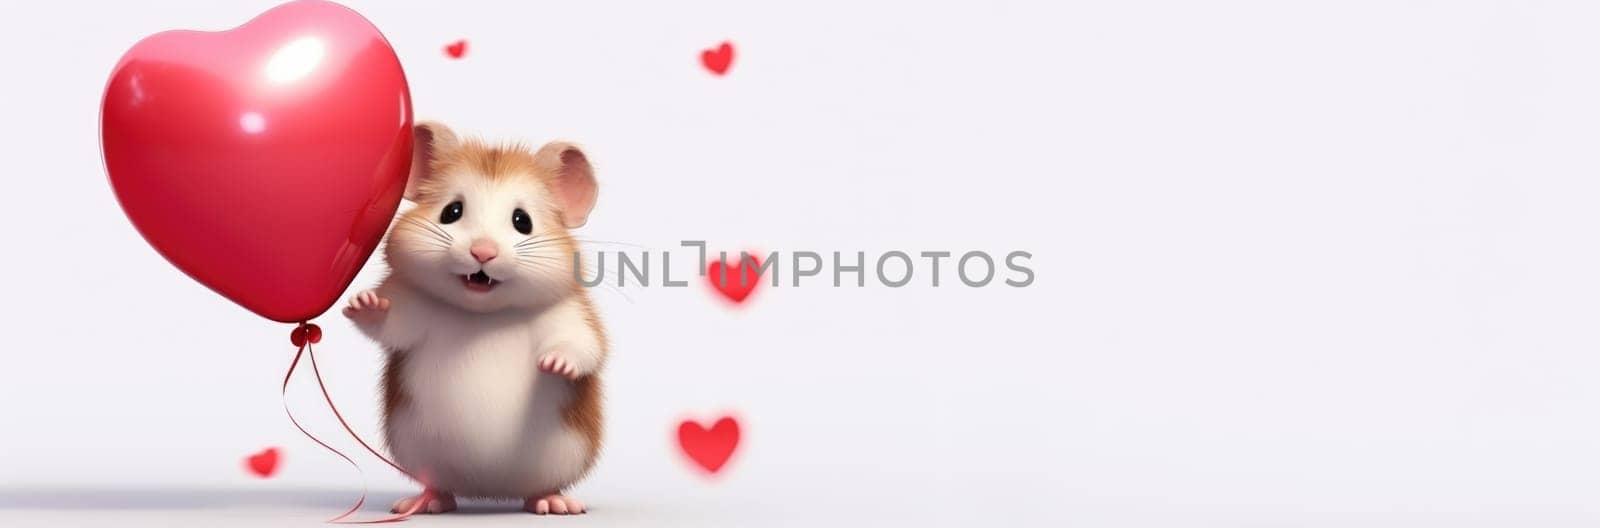 Banner of cute hamster with heart balloon on white background. Love from hamster. Valentine's Day. by JuliaDorian